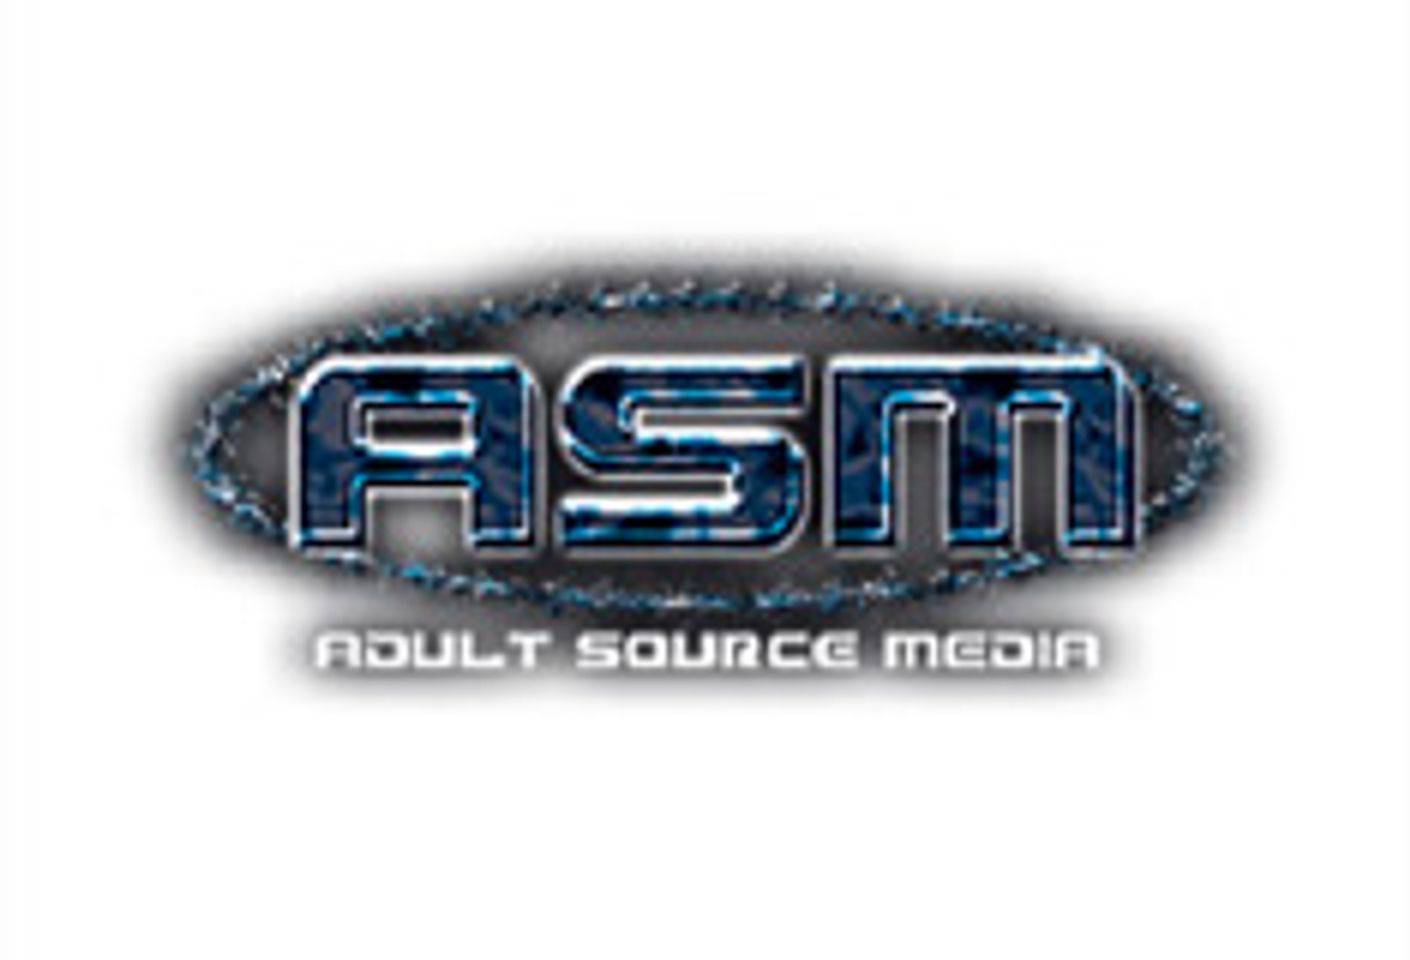 Adult Source Media Acquires Anime Titles